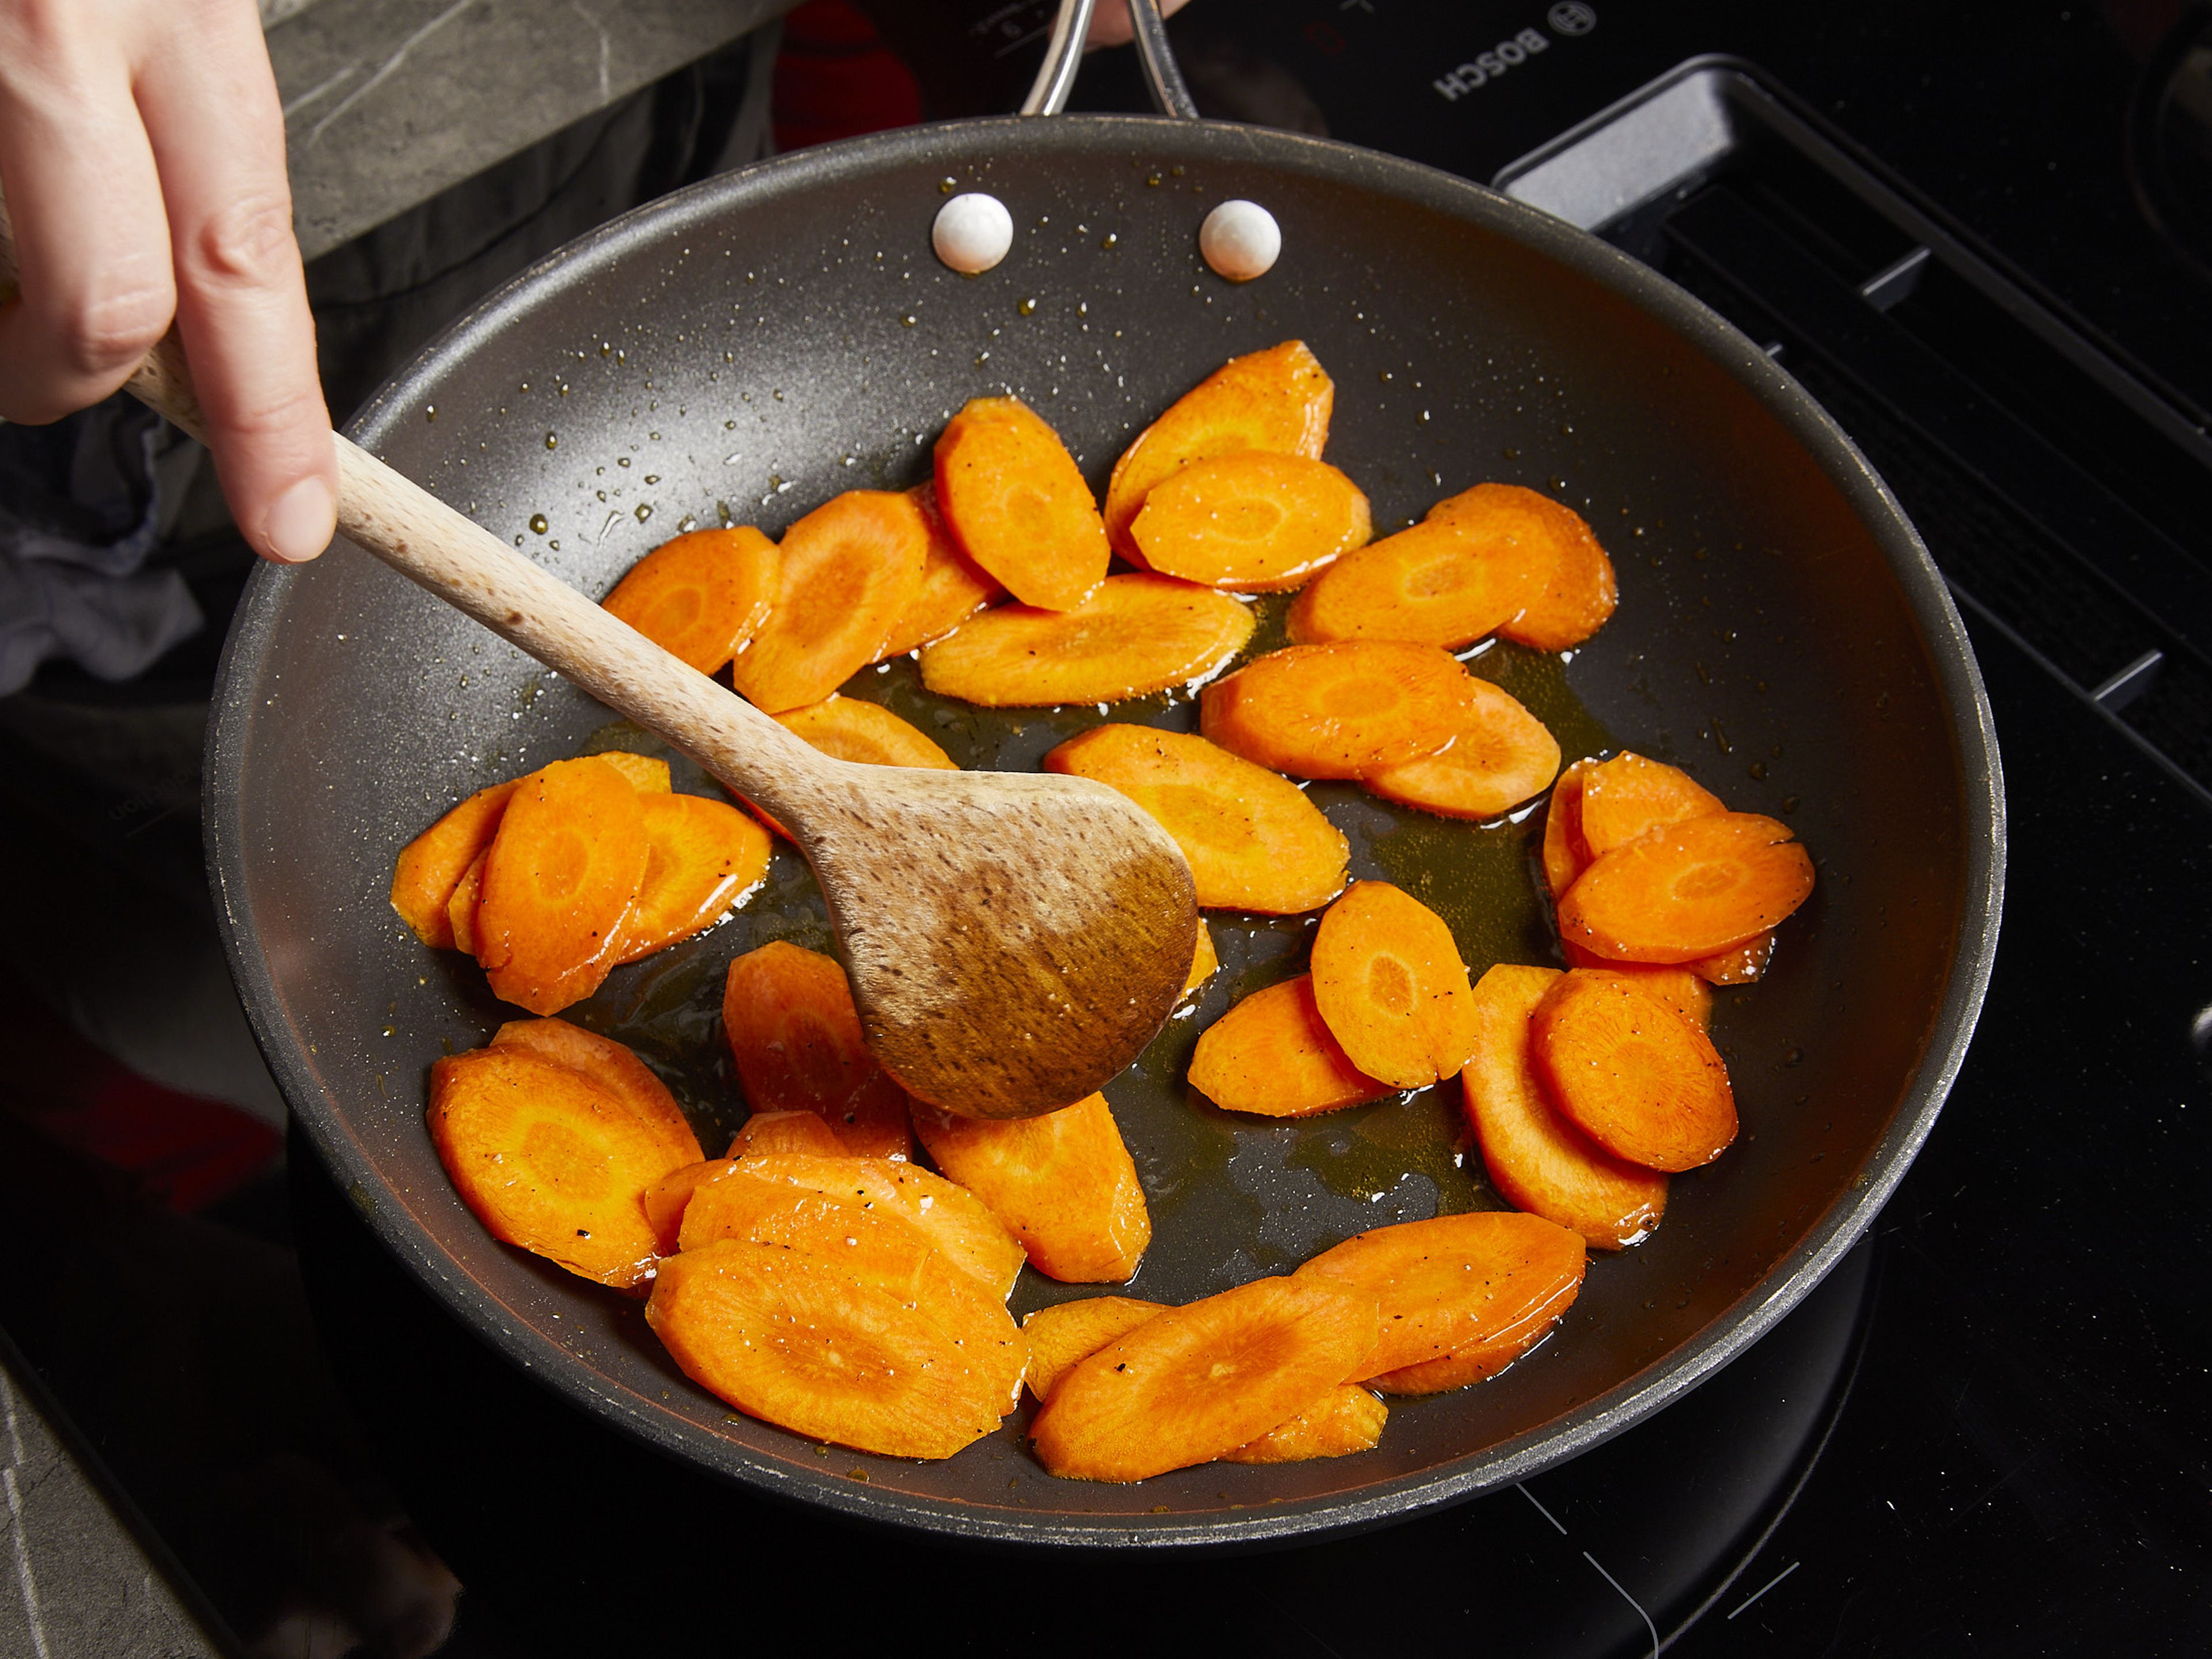 Meanwhile, heat the remaining oil in a frying pan and fry the carrot slices over medium heat for approx. 3–5 min, then season with salt. Mix the pesto with the cream in a small bowl. Grate parmesan cheese and set some aside for garnish.